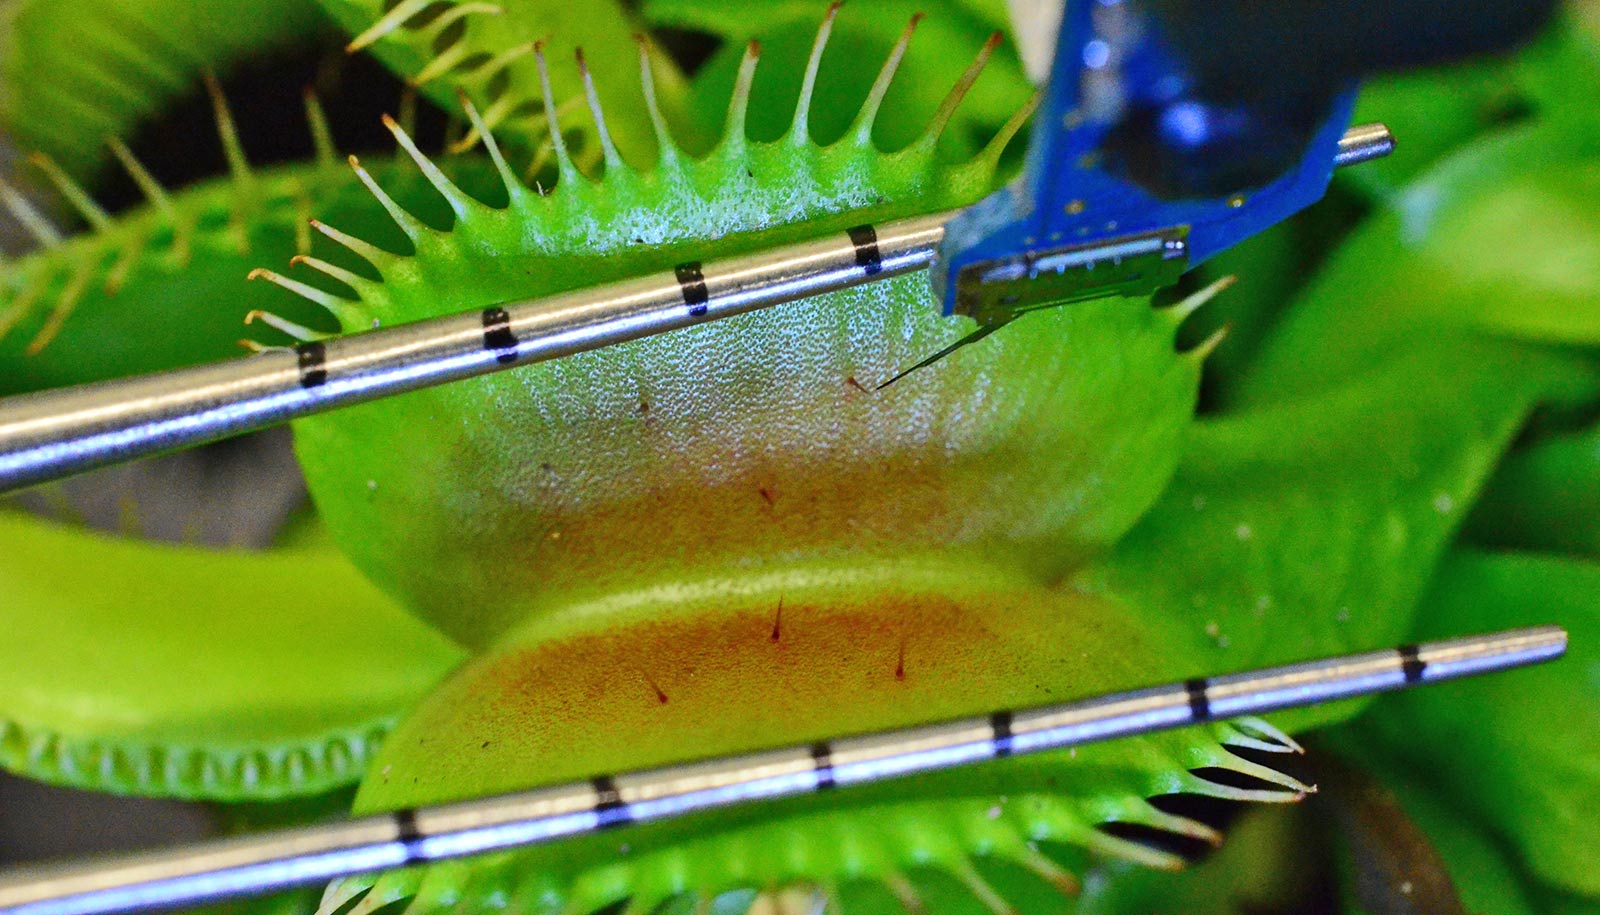 metal bars hold open flytrap leaves and sensor pokes in